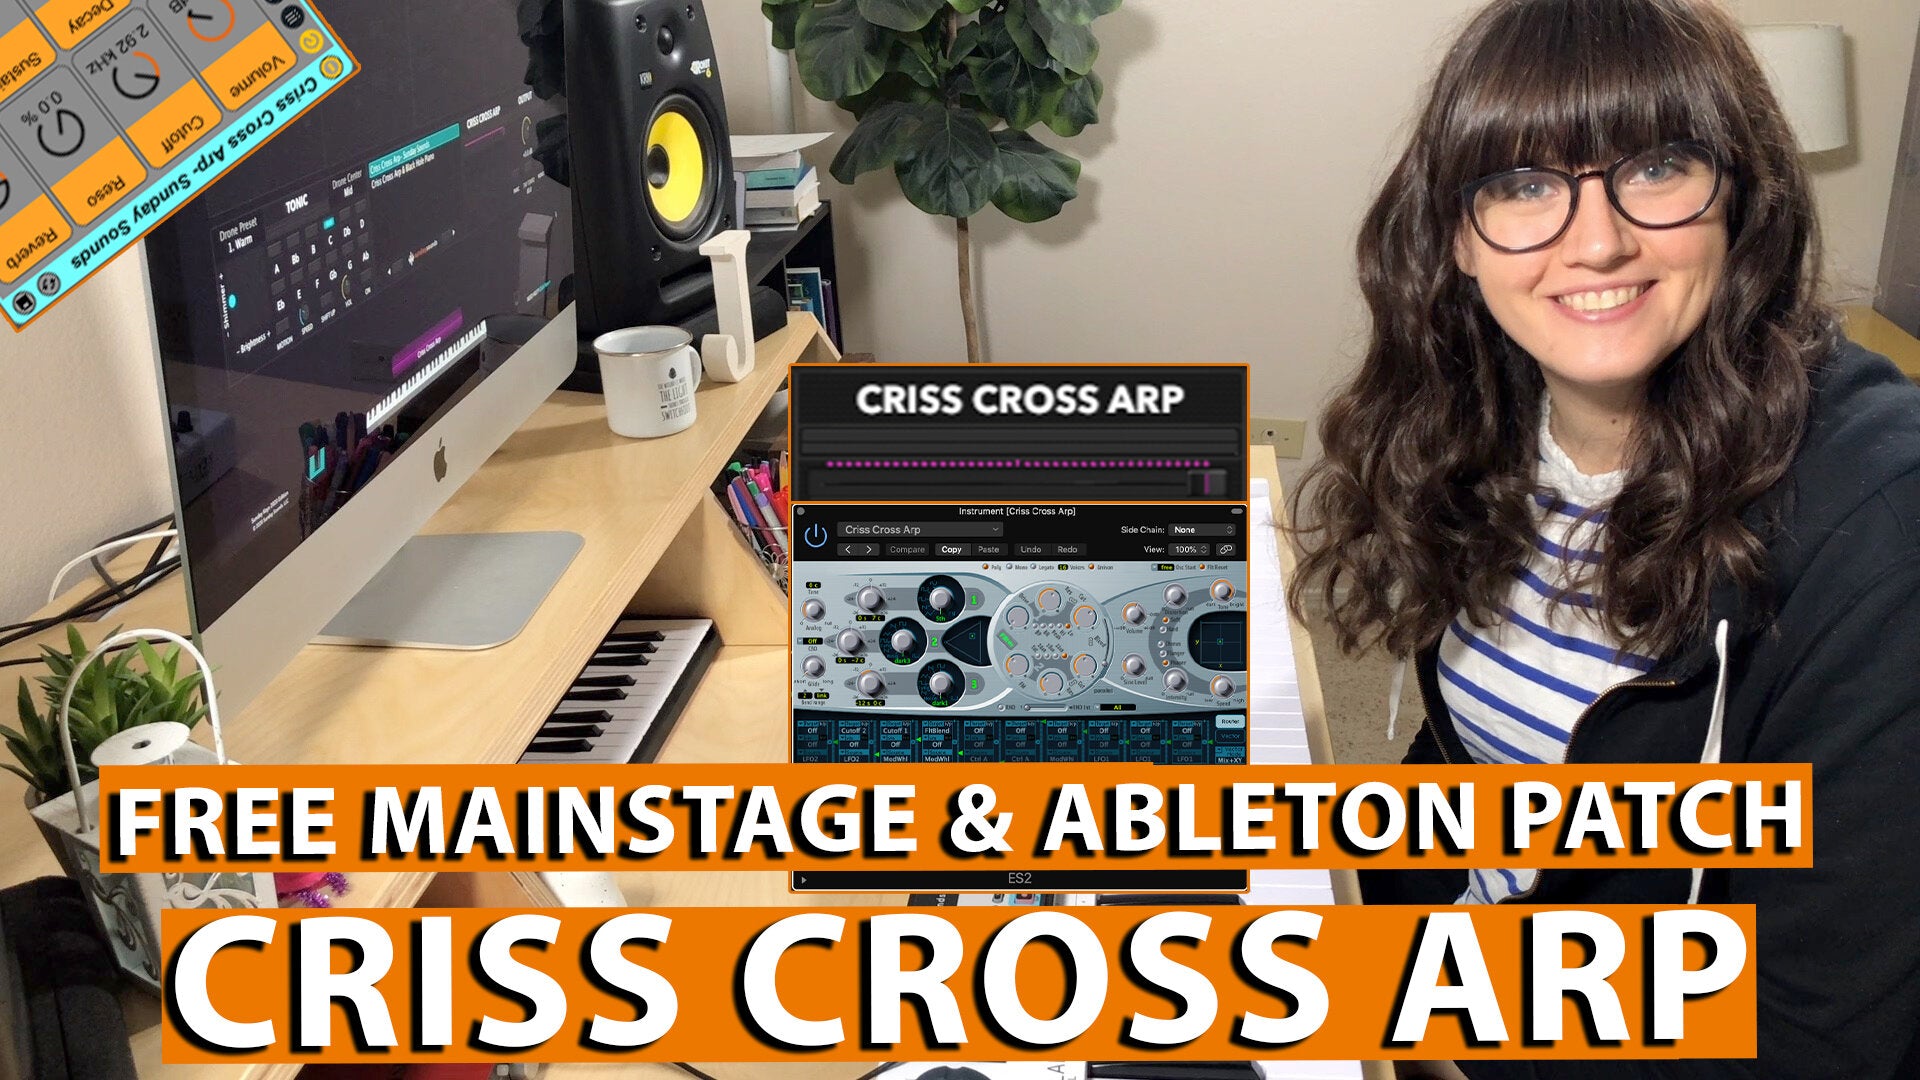 Free MainStage & Ableton Worship Patch! - Criss Cross Arp